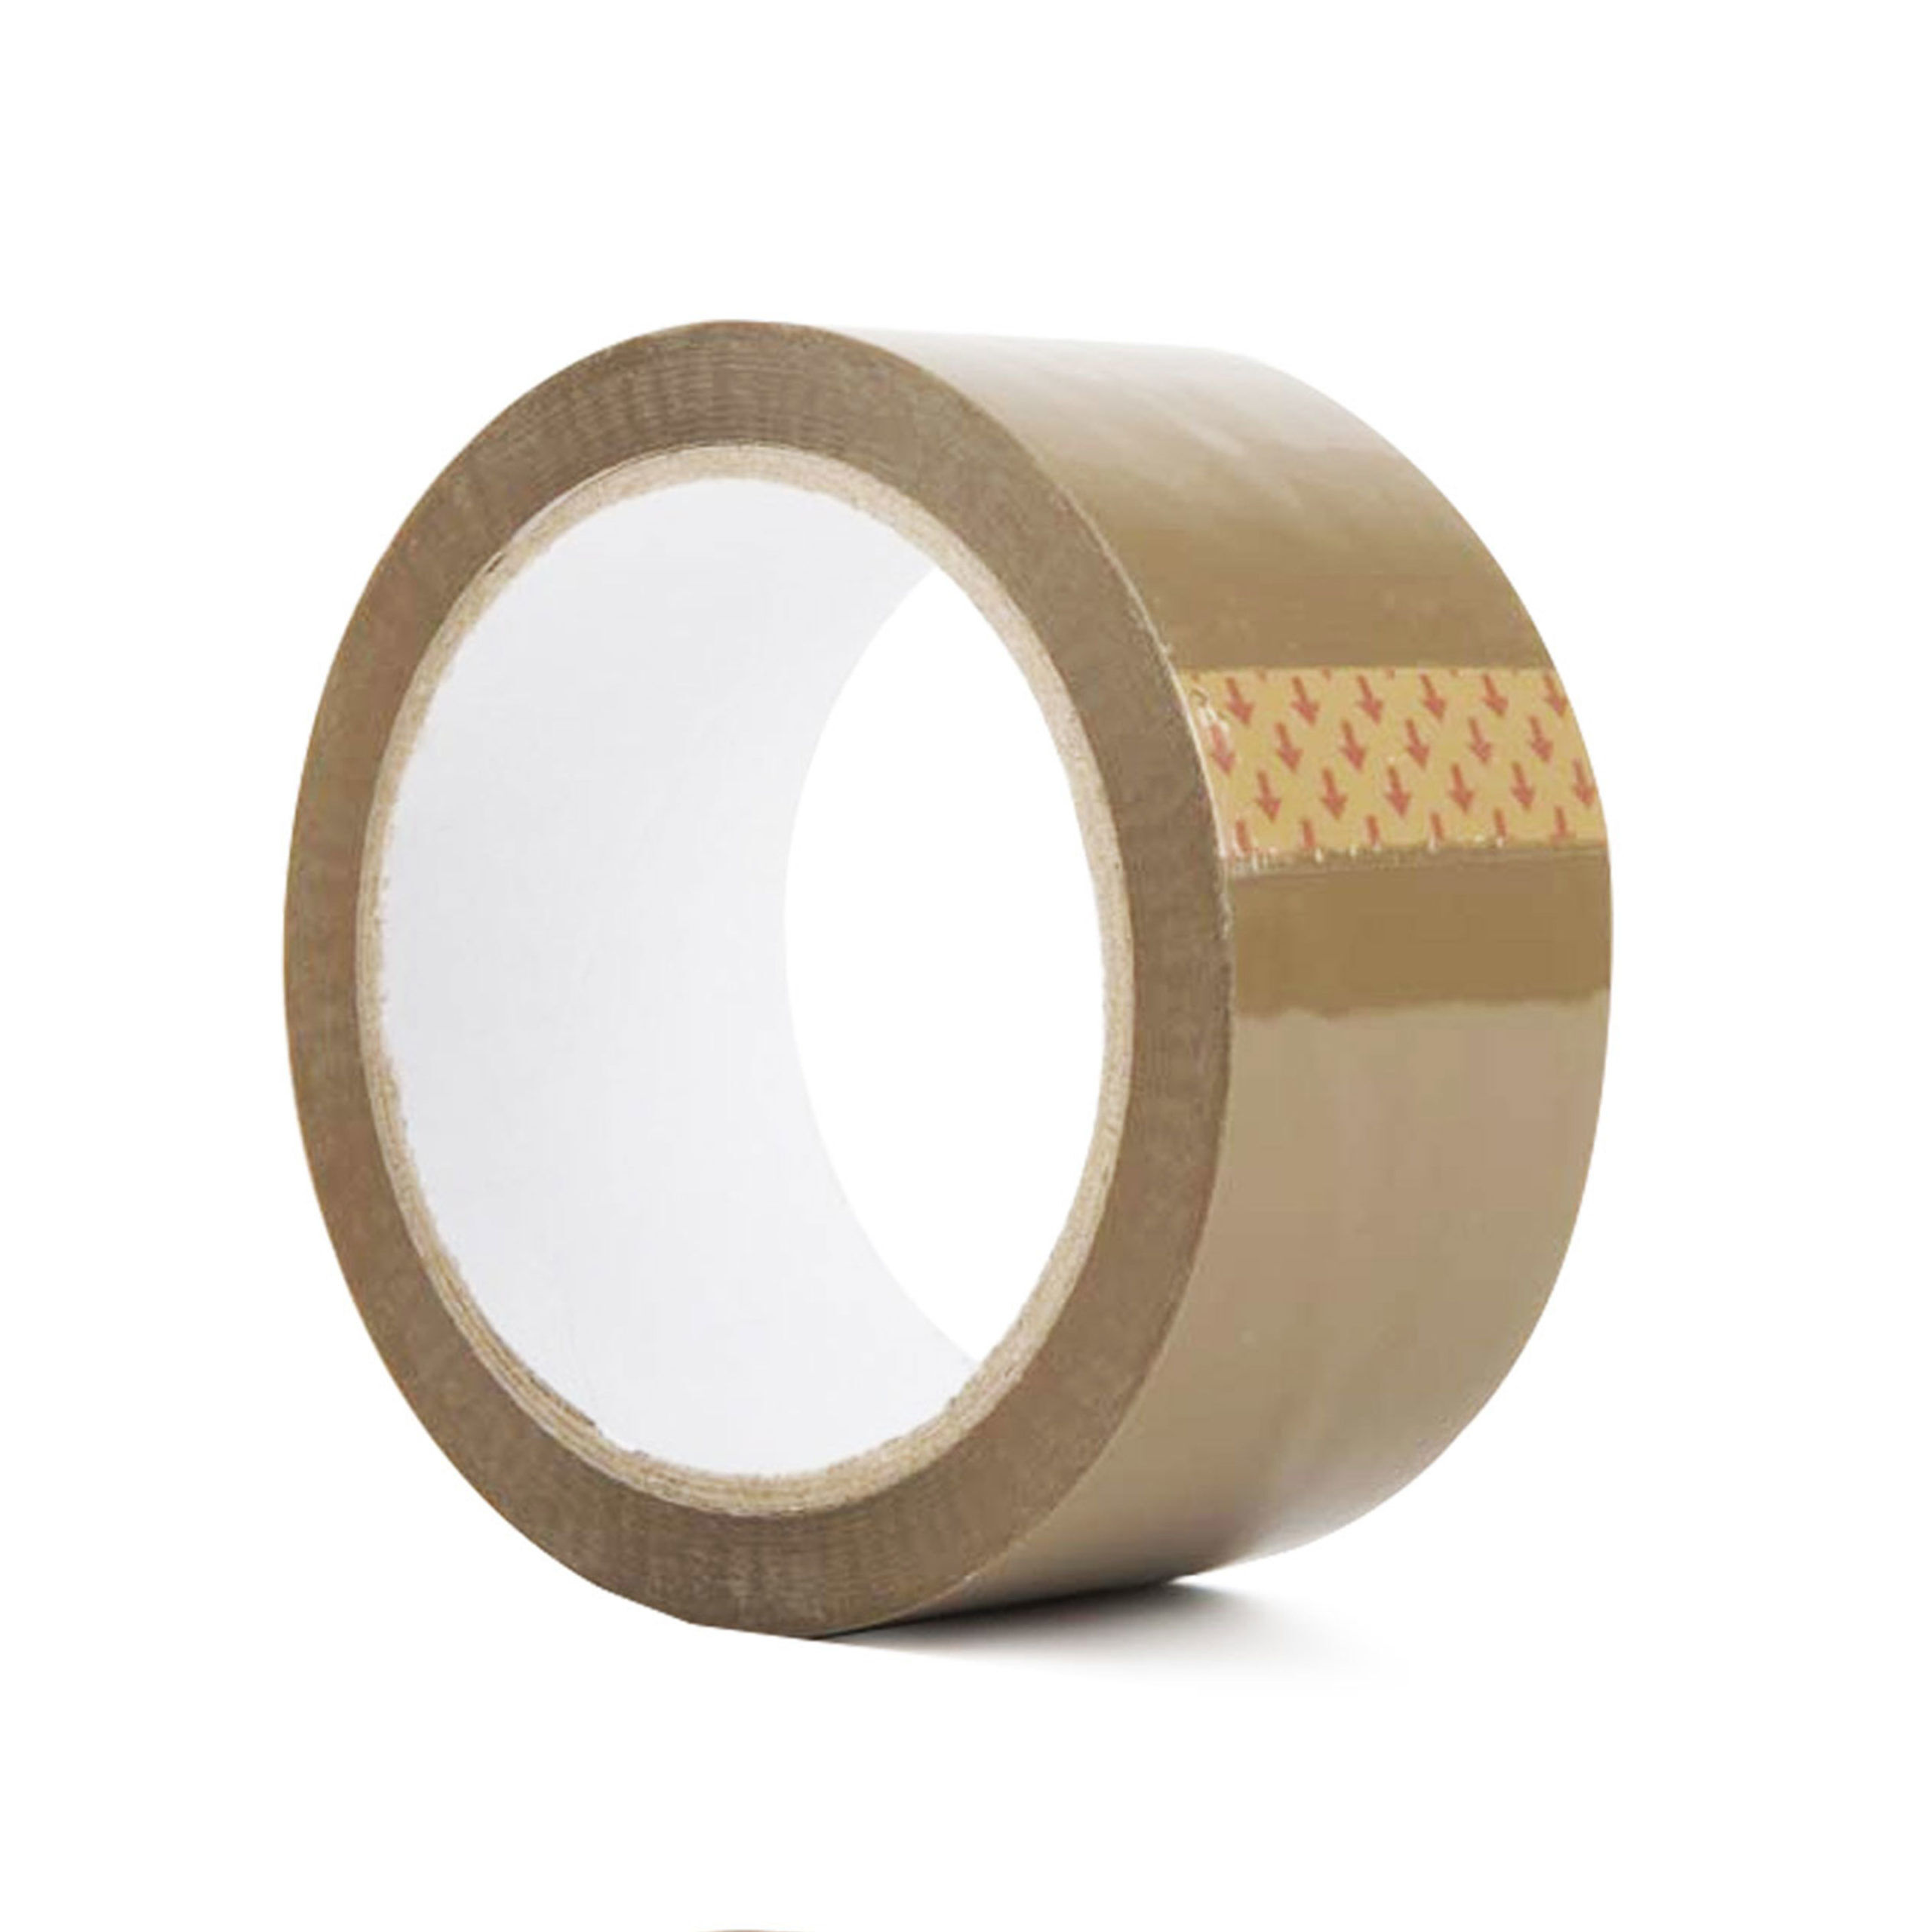 LONG LENGTH TAPE STRONG CLEAR BROWN FRAGILE 48mm x 66M PACKING PARCEL TAPE 